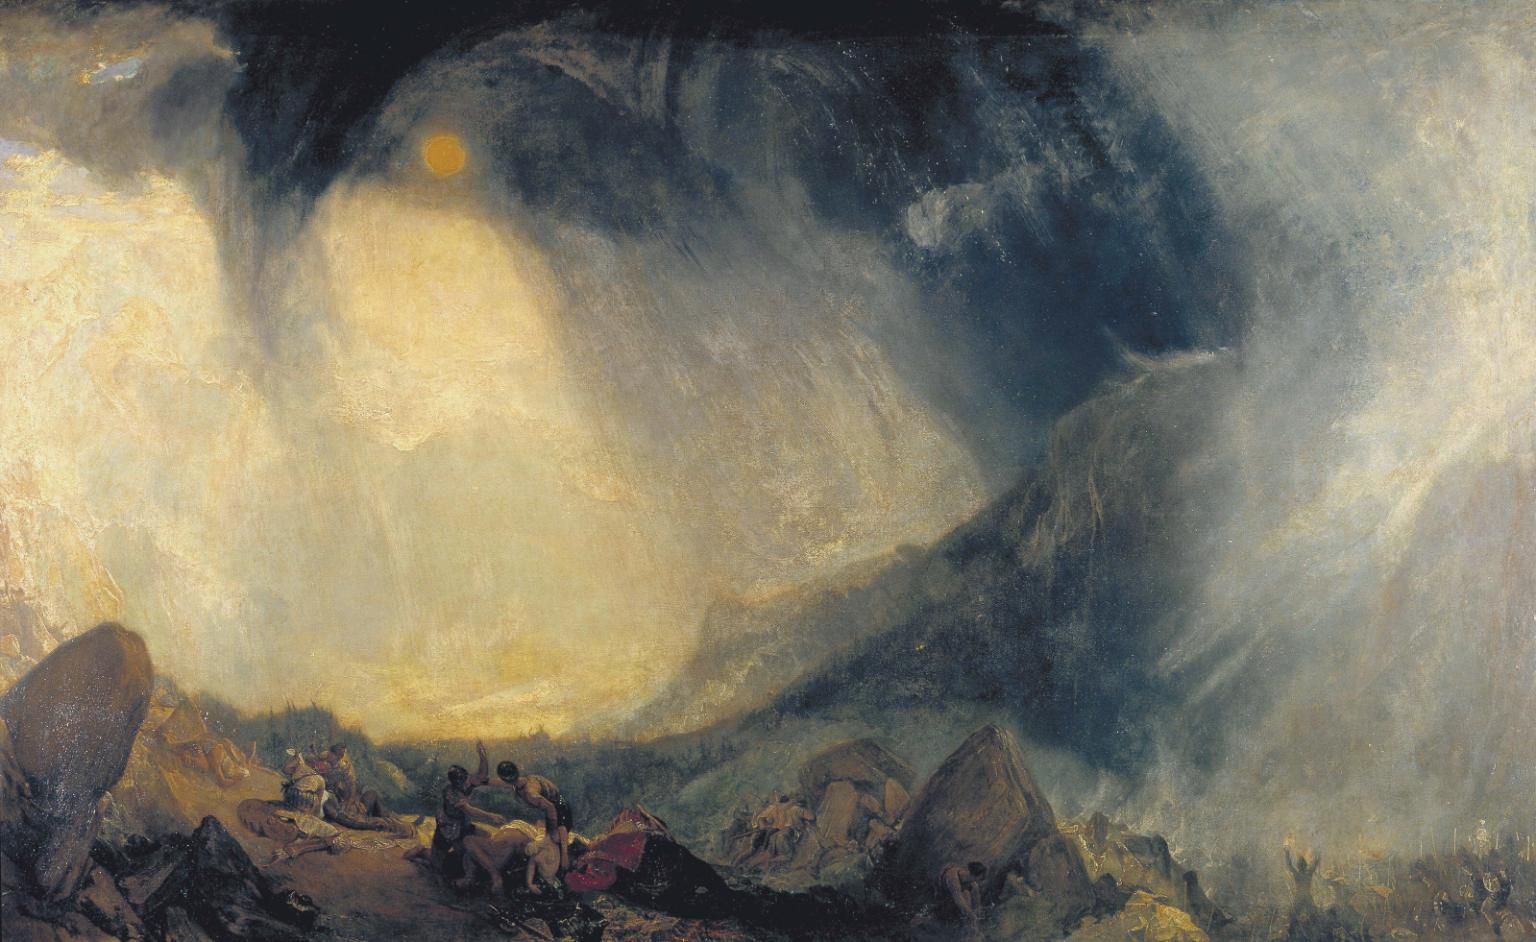 Snow Storm: Hannibal and his Army Crossing the Alps. Turner